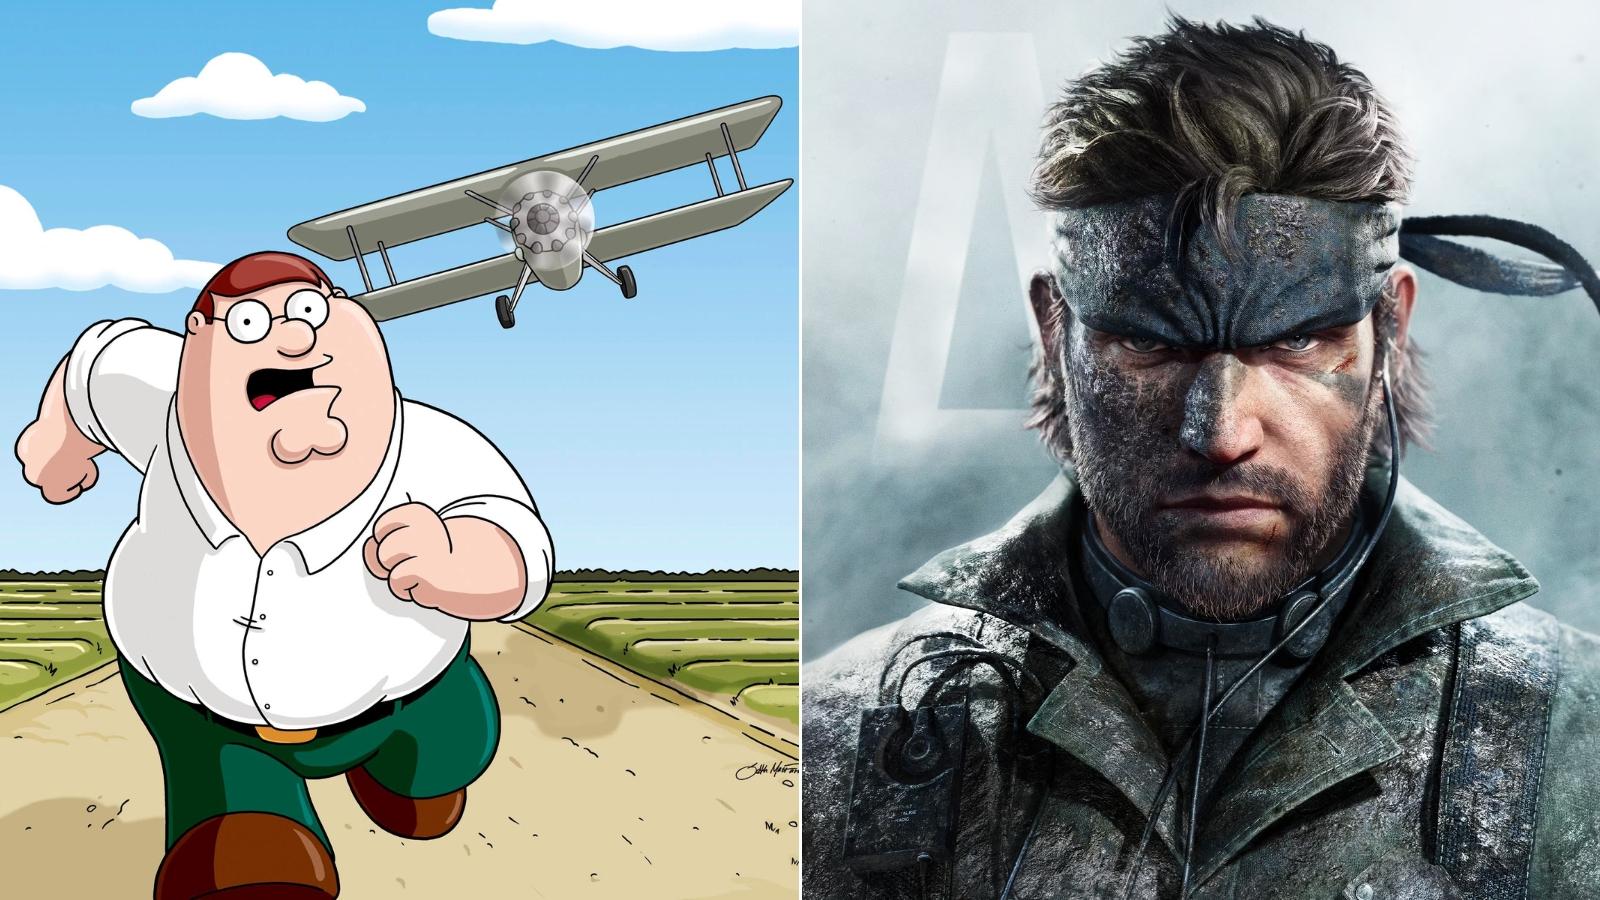 Peter Griffin from Family Guy and Solid Snake